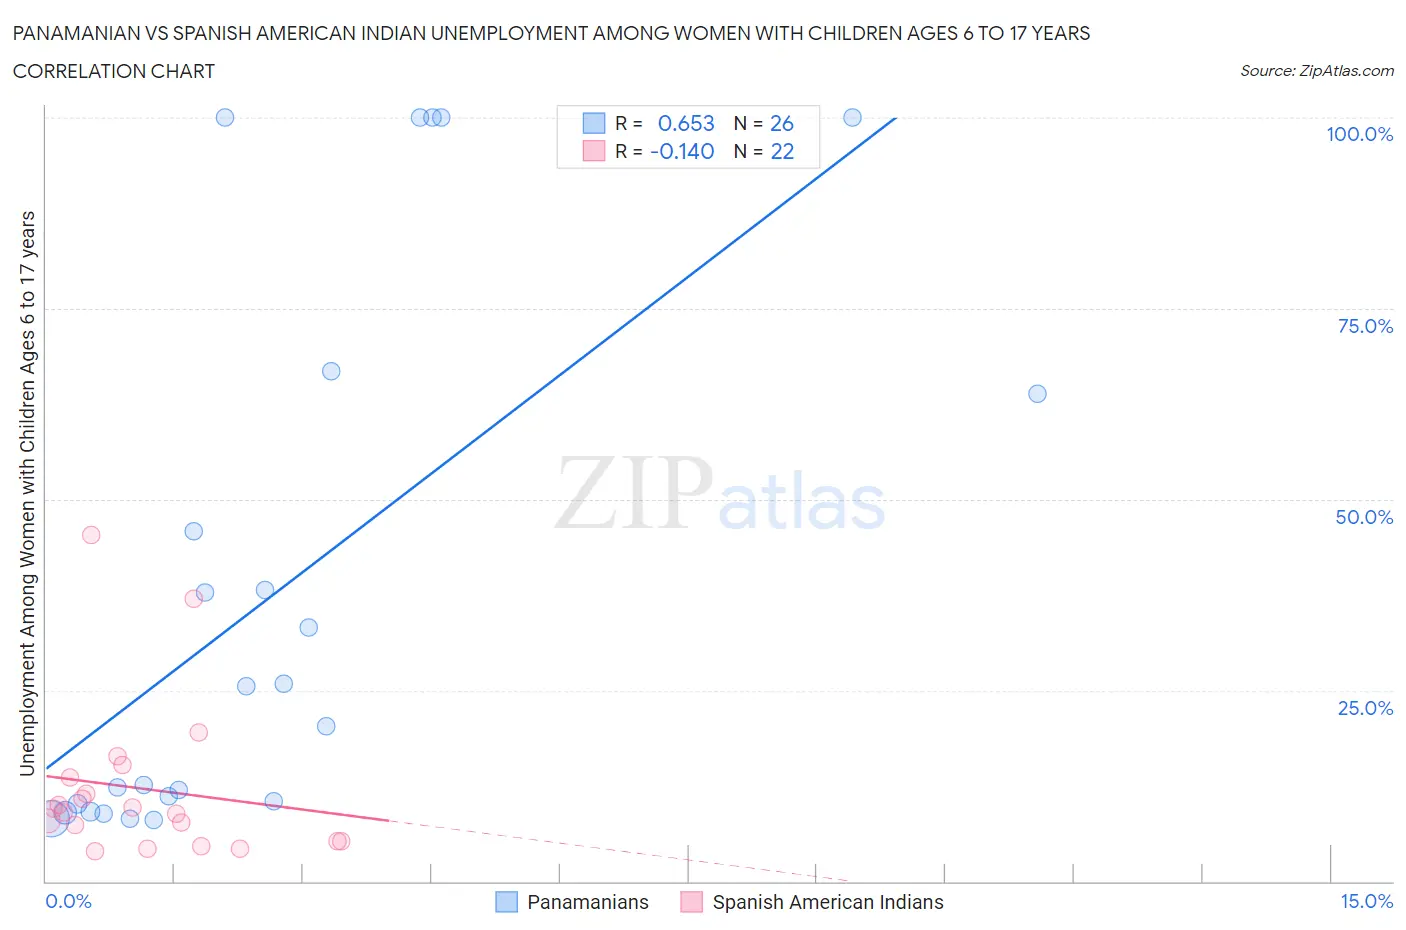 Panamanian vs Spanish American Indian Unemployment Among Women with Children Ages 6 to 17 years